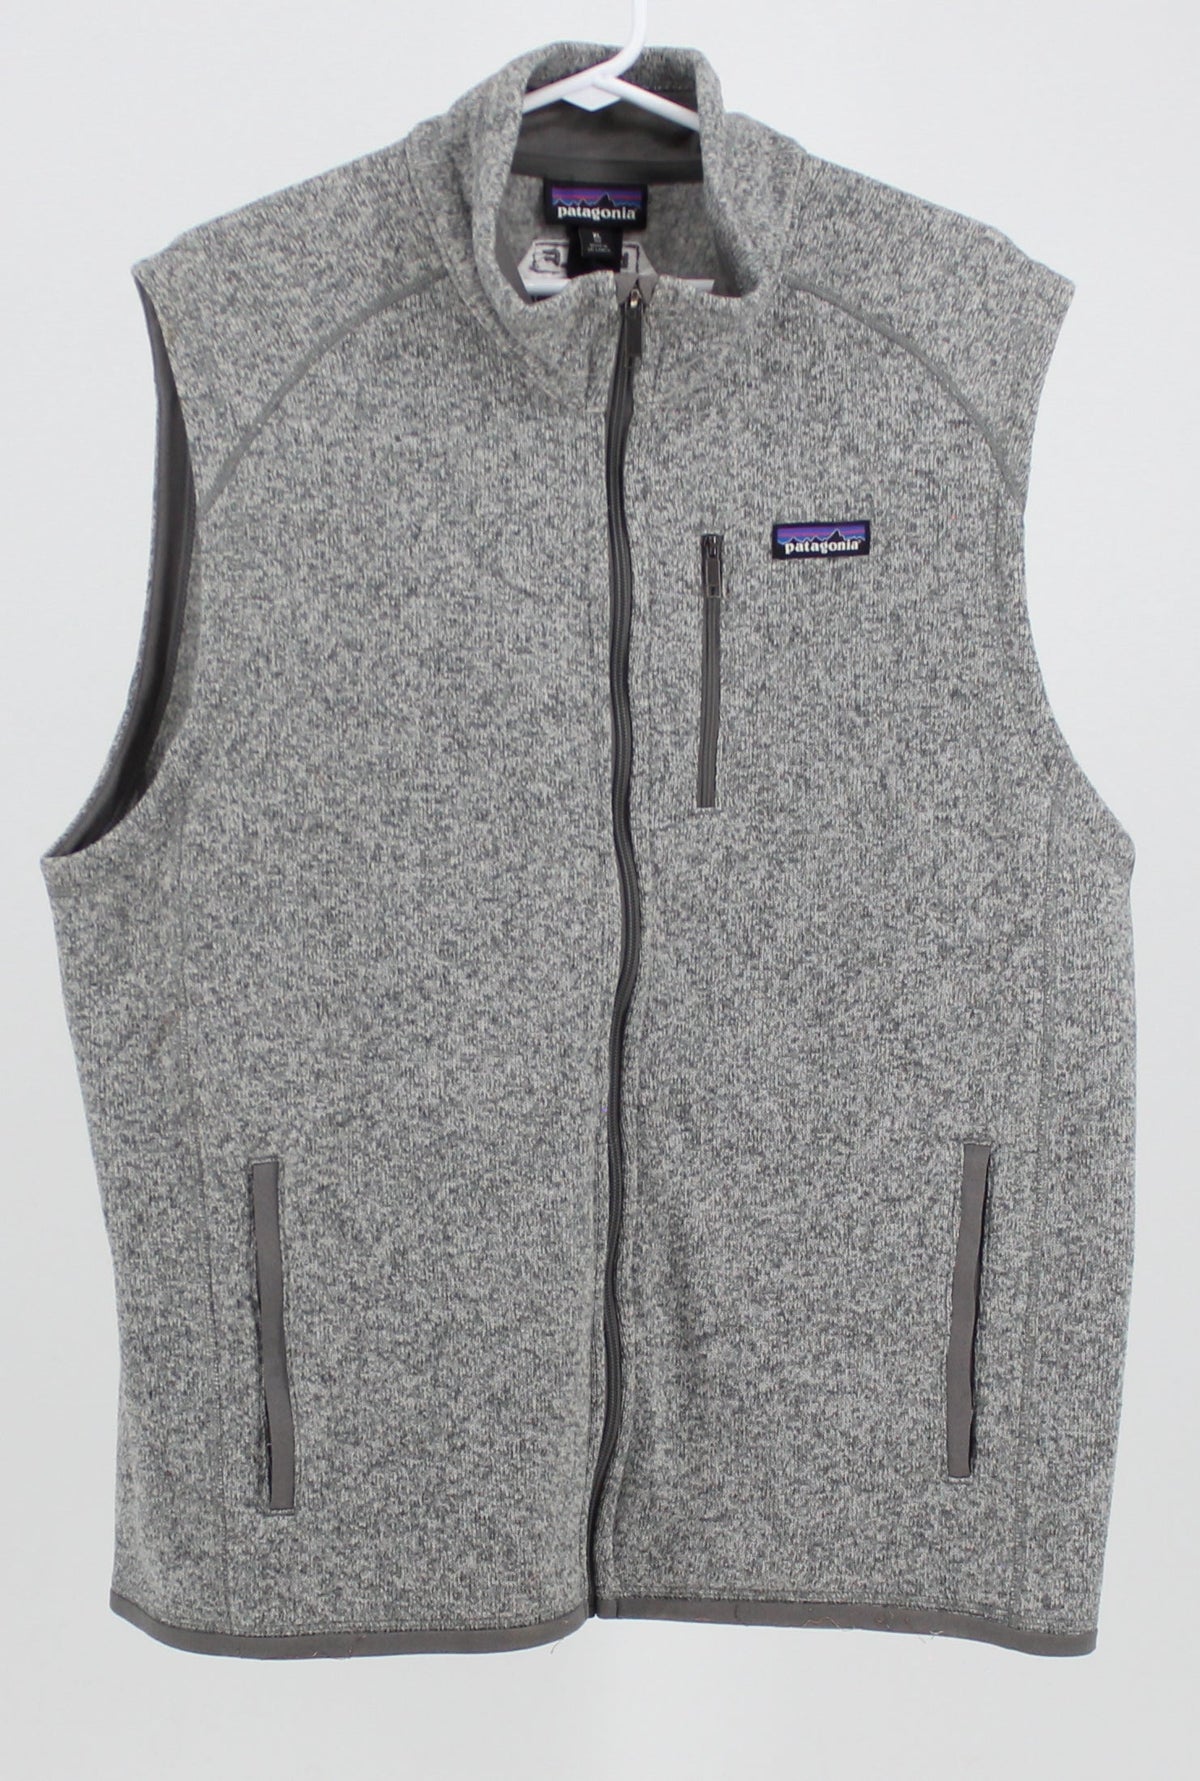 Patagonia Grey Vest With Zip Up Pocket on Front